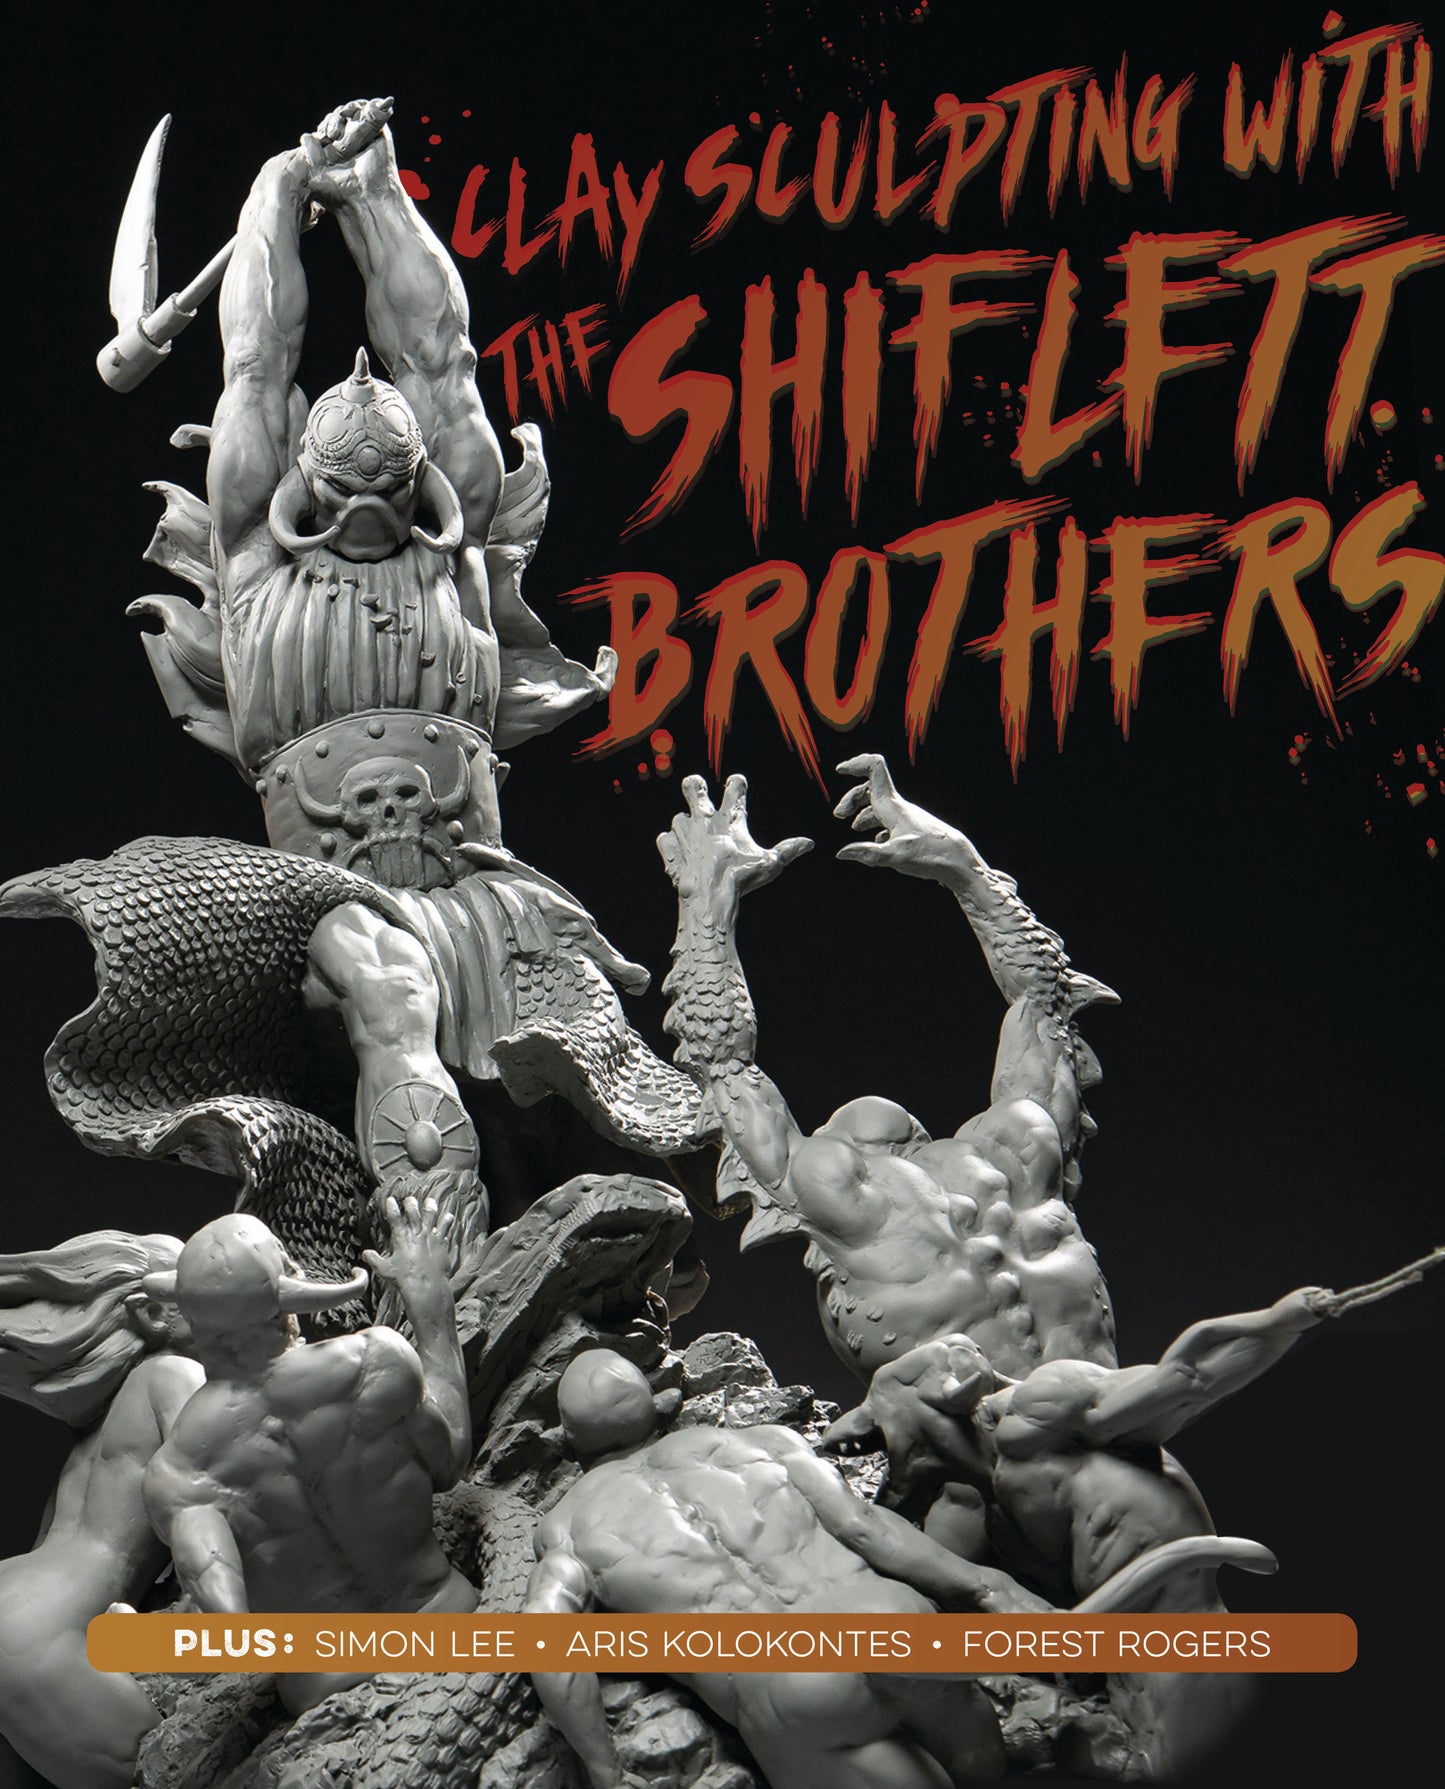 Clay Sculpting with the Shiflett Brothers